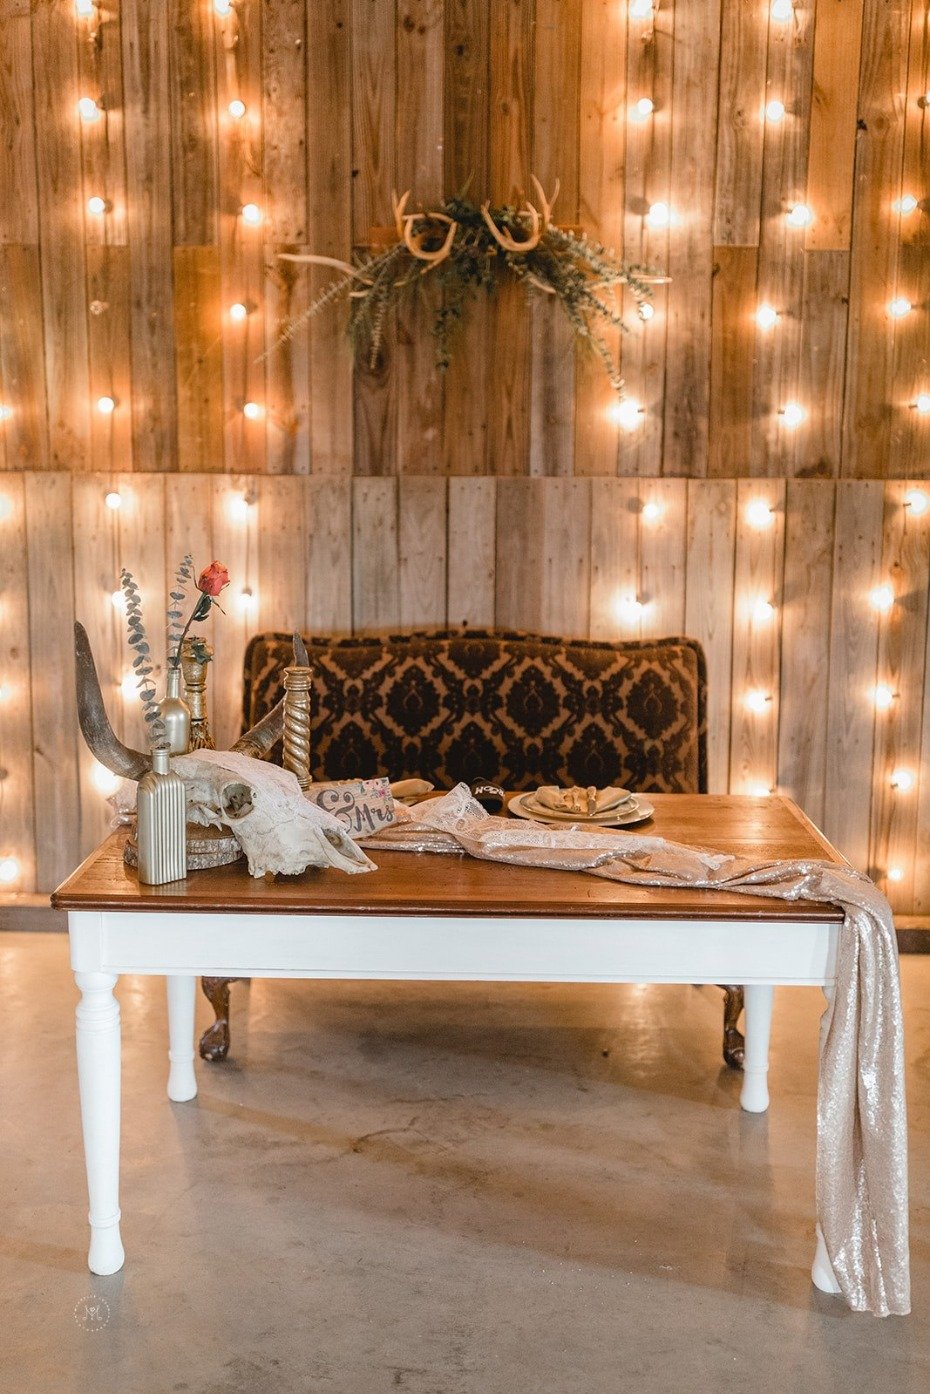 Country rustic sweetheart table